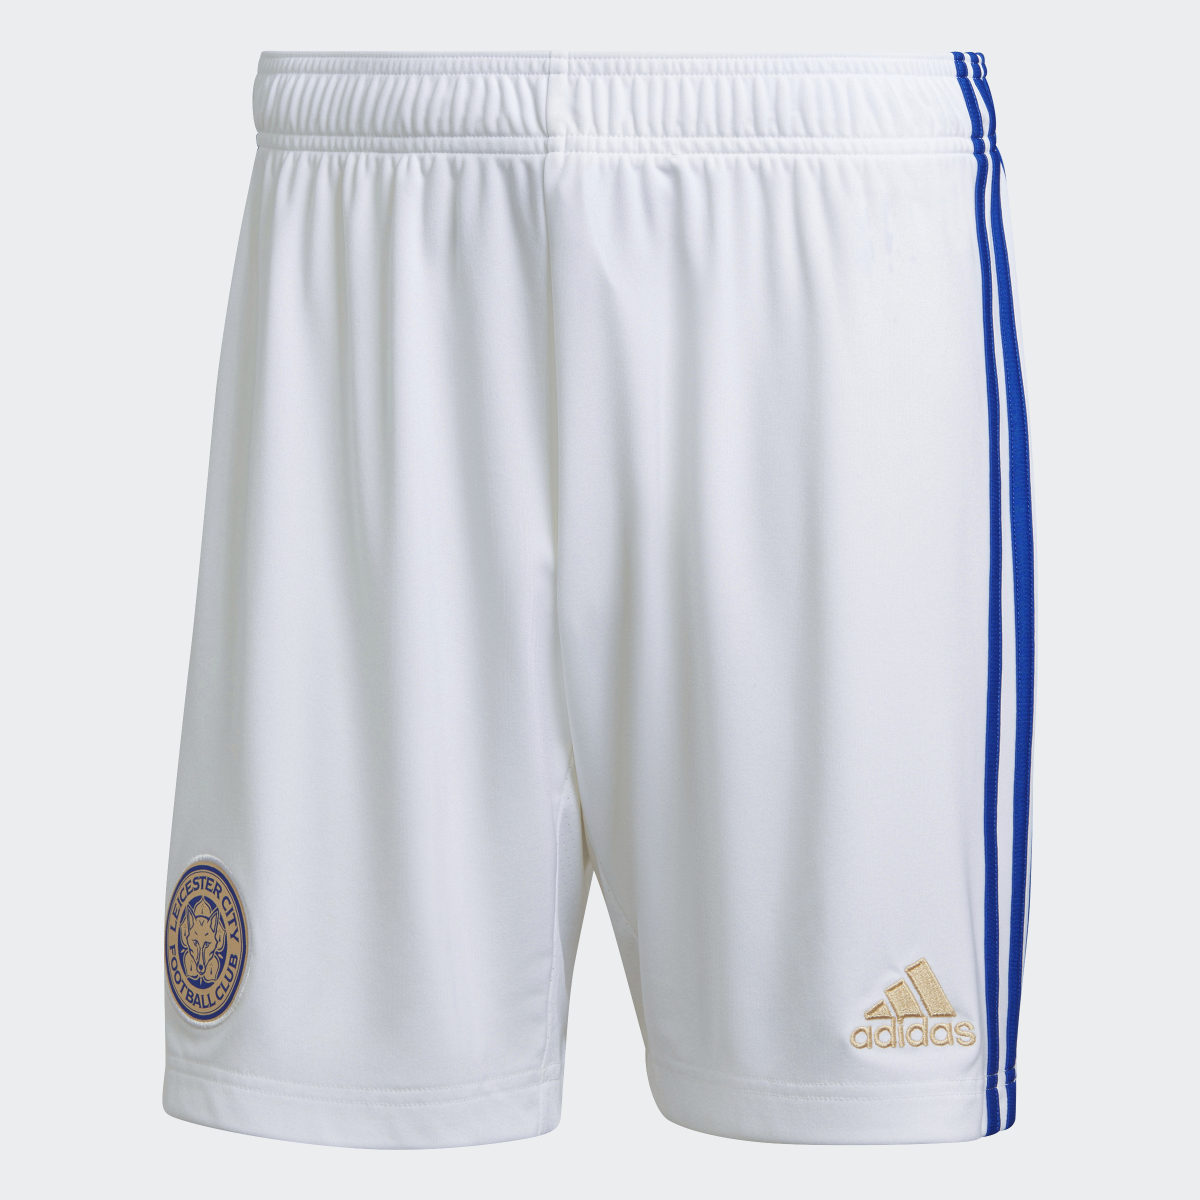 Adidas Leicester City FC 22/23 Home Shorts. 4